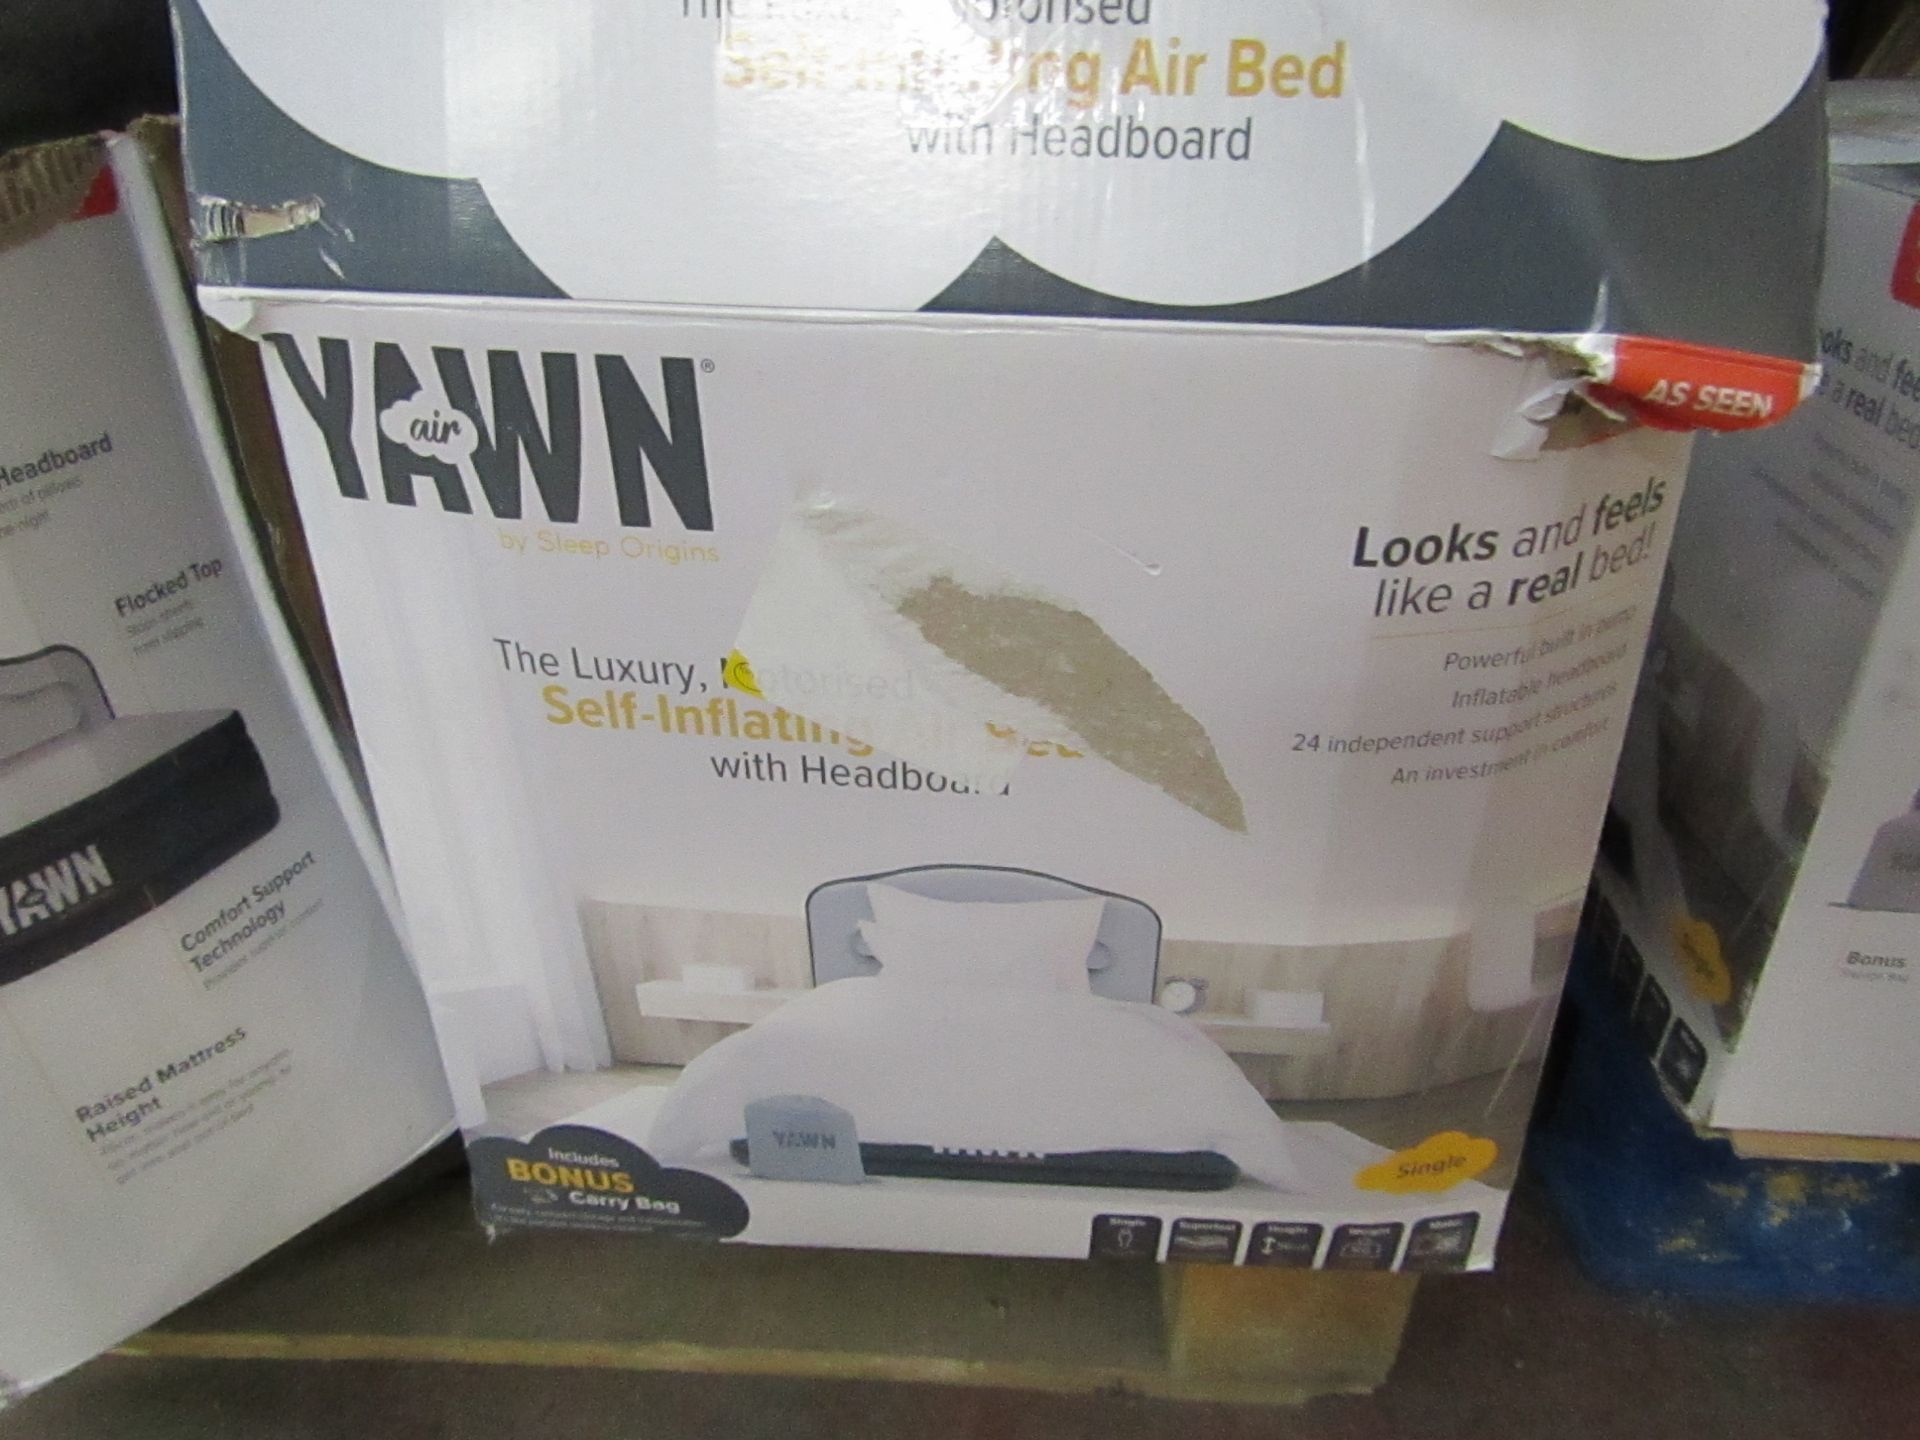 1x | YAWN AIRBED/SINGLE | UNCHECKED & BOXED | NO ONLINE RE-SALE | SKU C5060541515659 | RRP £59.99 |